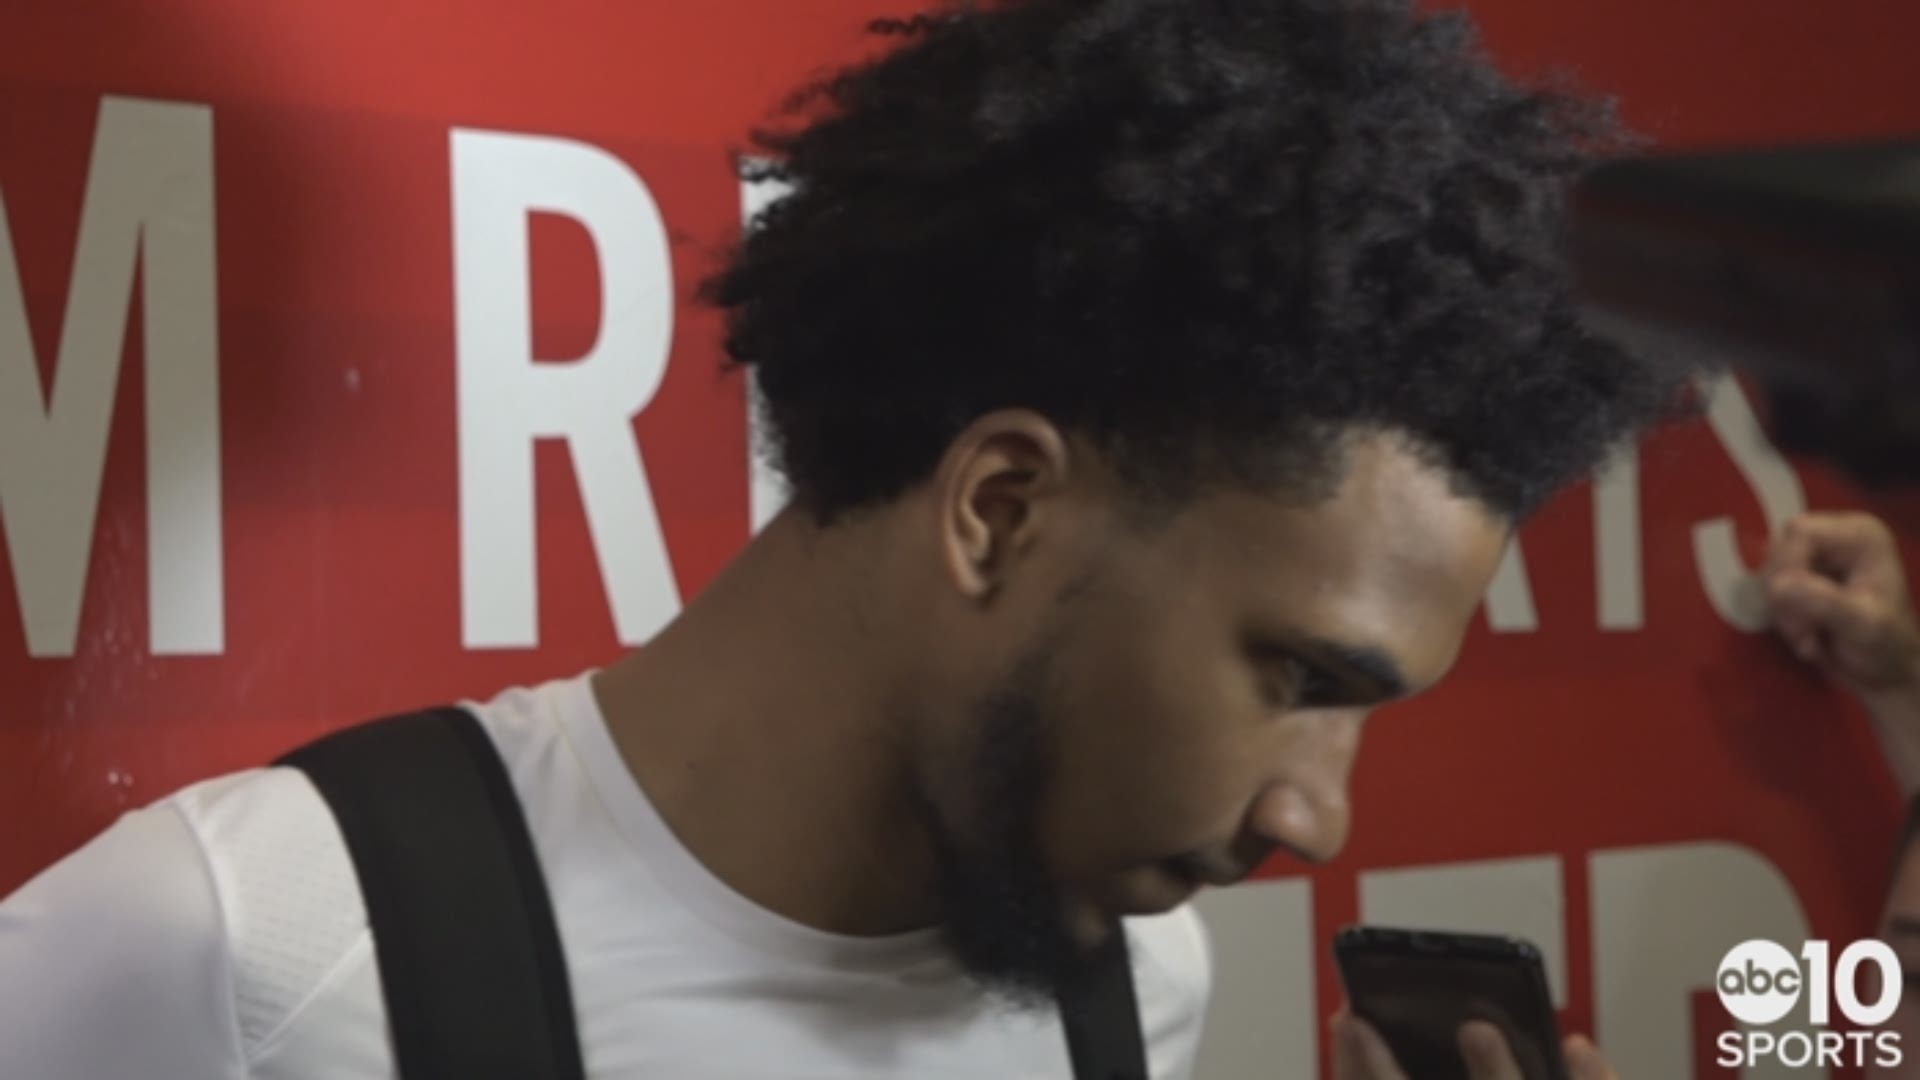 Kings forward Marvin Bagley III talks about his first experience against fellow rookie DeAndre Ayton, Saturday's loss to the Suns and suffering his first injury.